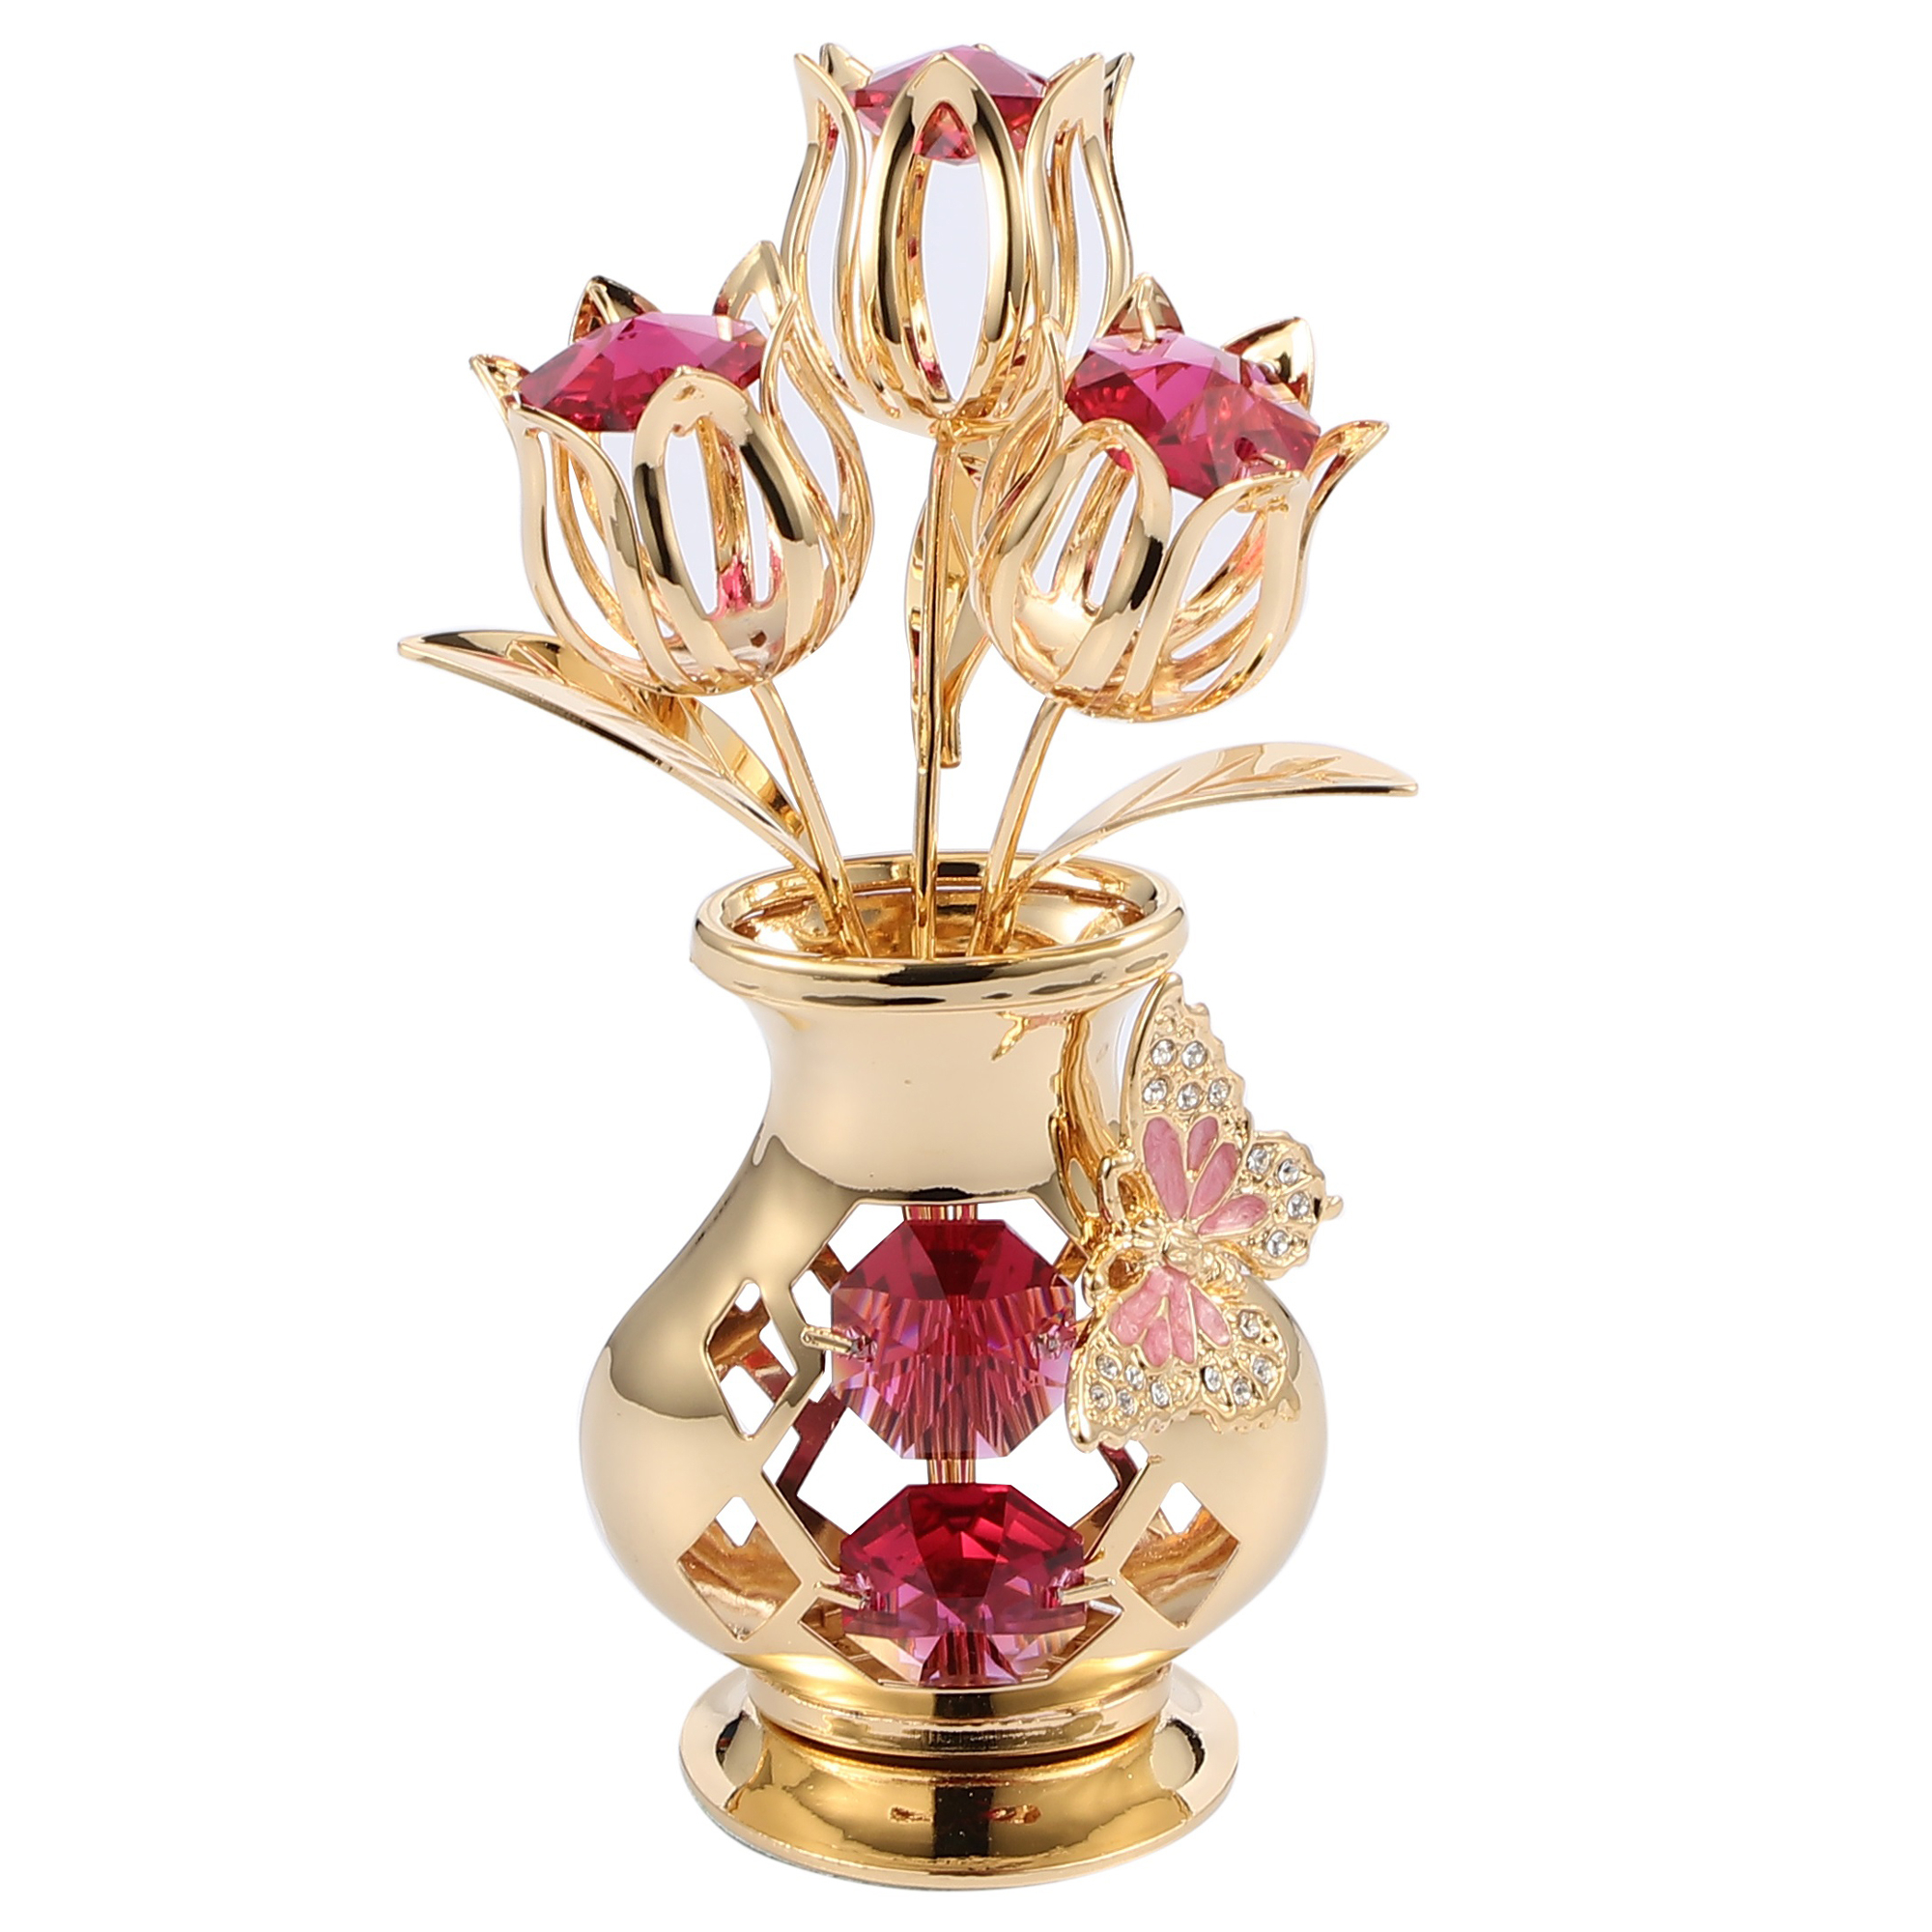 Matashi 24K Gold Plated Crystal Studded Flower Ornament In Vase With Decorative Butterfly Gift For Christmas Valentine's Day (Red Crystals)